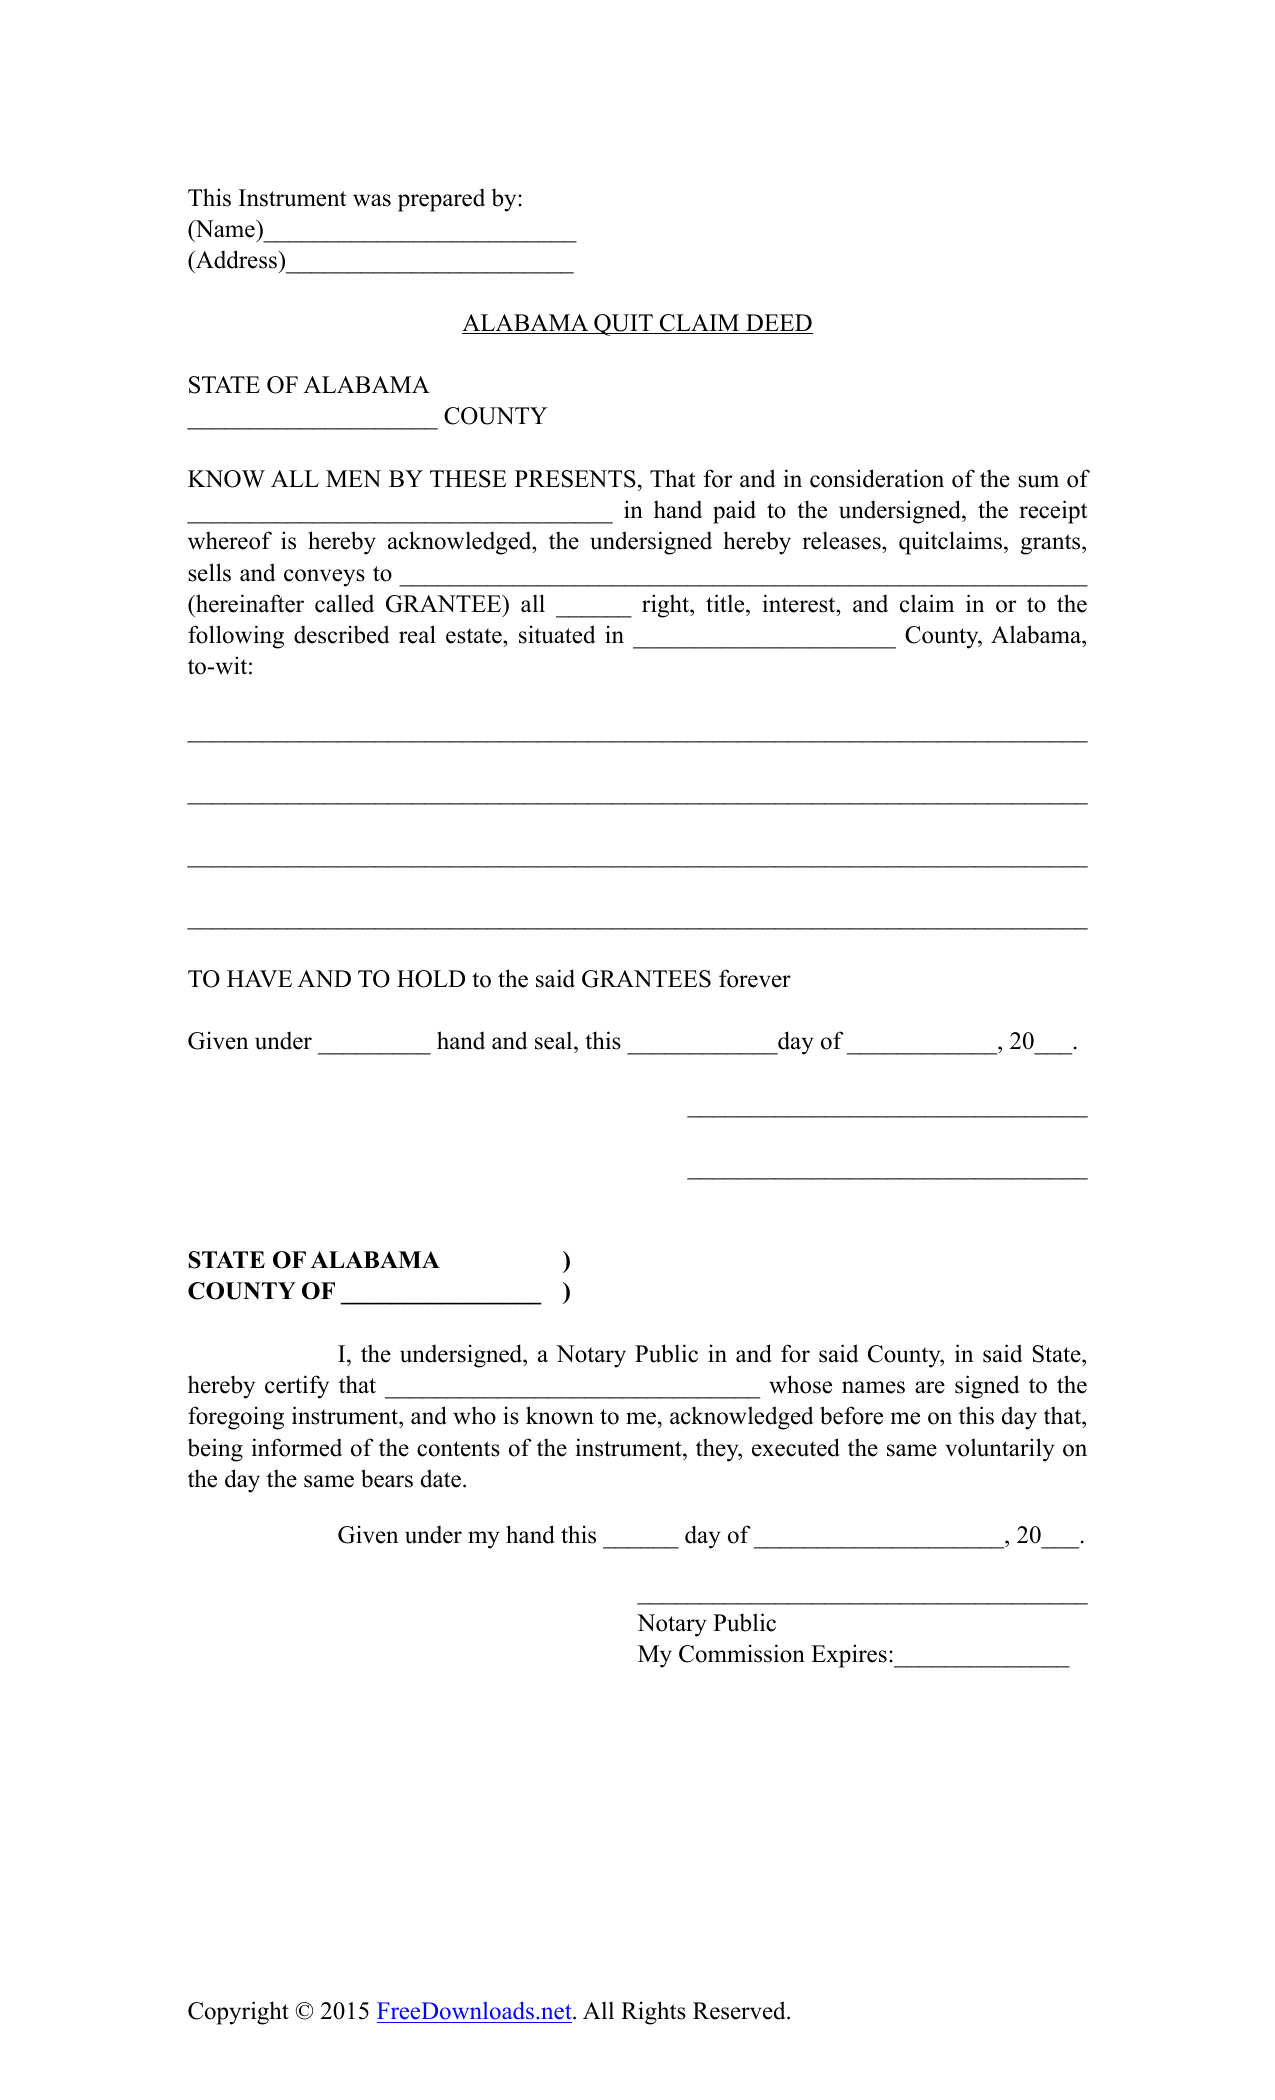 46 Free Quit Claim Deed Forms Templates Template Lab #49519005611 - Free Printable Quit Claim Deed Washington State Form